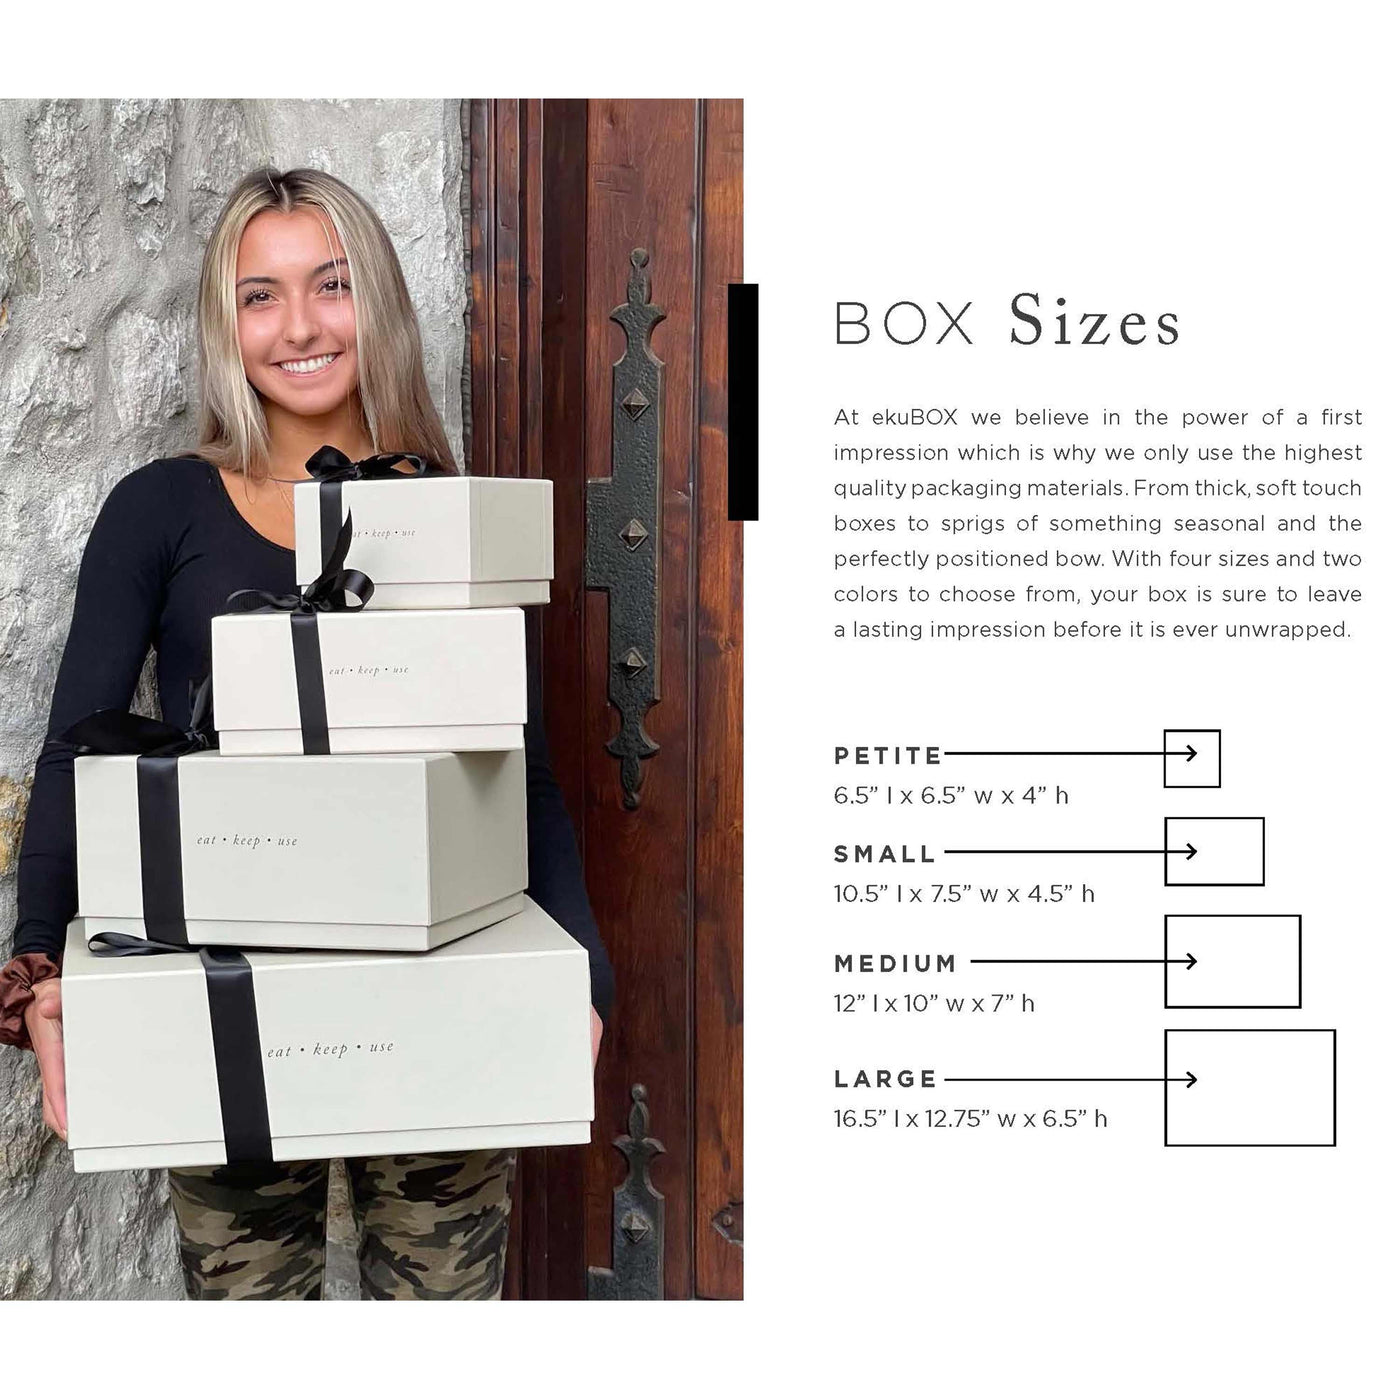 We believe in the power of a first impression, that's why we use only the finest packing materials. From thick soft-touch boxes, and thick satin ribbons to a spring of something seasonal on top. We take great pride in our presentation.